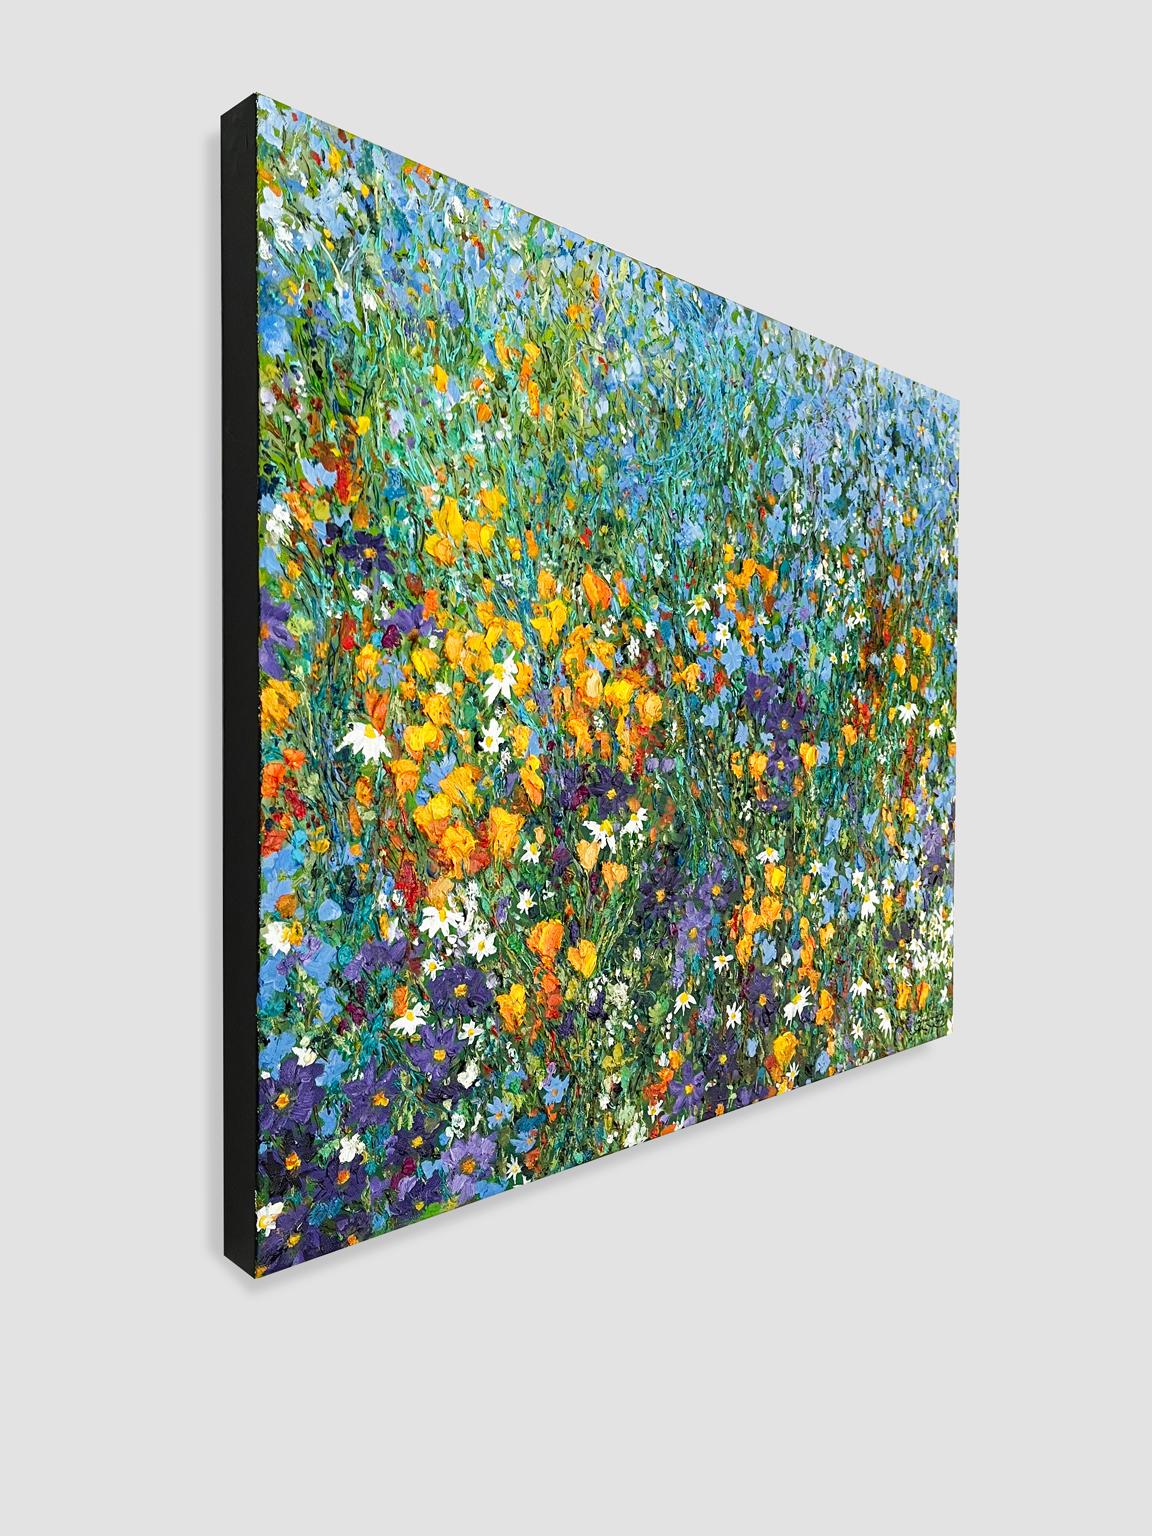 <p>Artist Comments<br>In a tranquil garden, wildflowers daydream and create their own sunshine. Blue and gold blooms dominate the cluster, with red ones adding vibrant accents. Infused with an impressionist touch, the composition's visible strokes